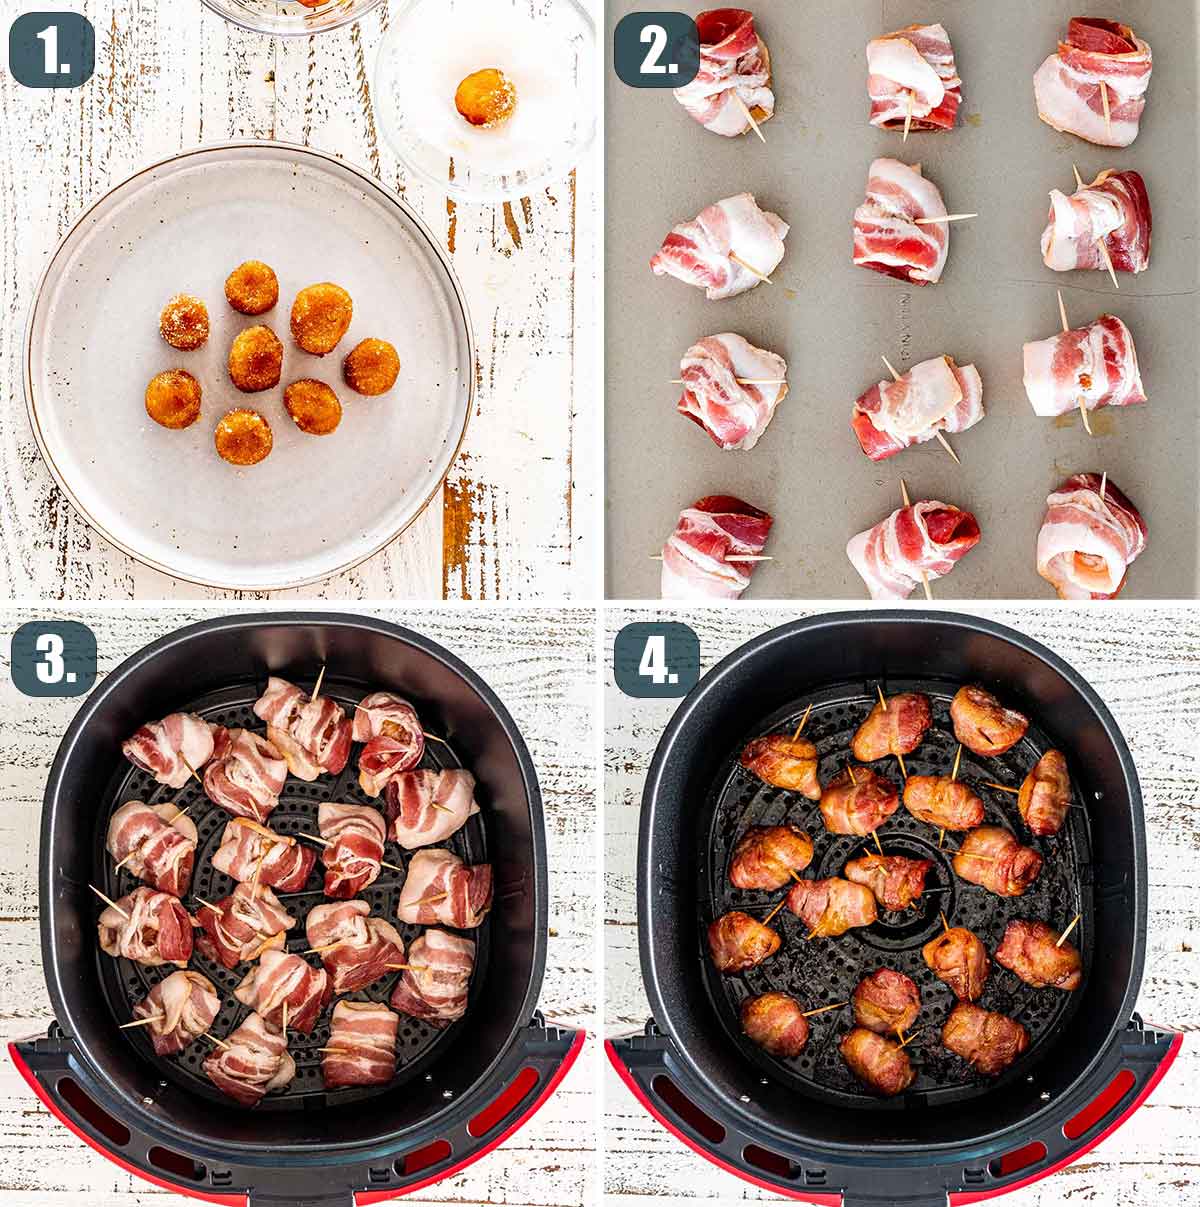 detailed process shots showing how to make bacon wrapped water chestnuts in the air fryer.